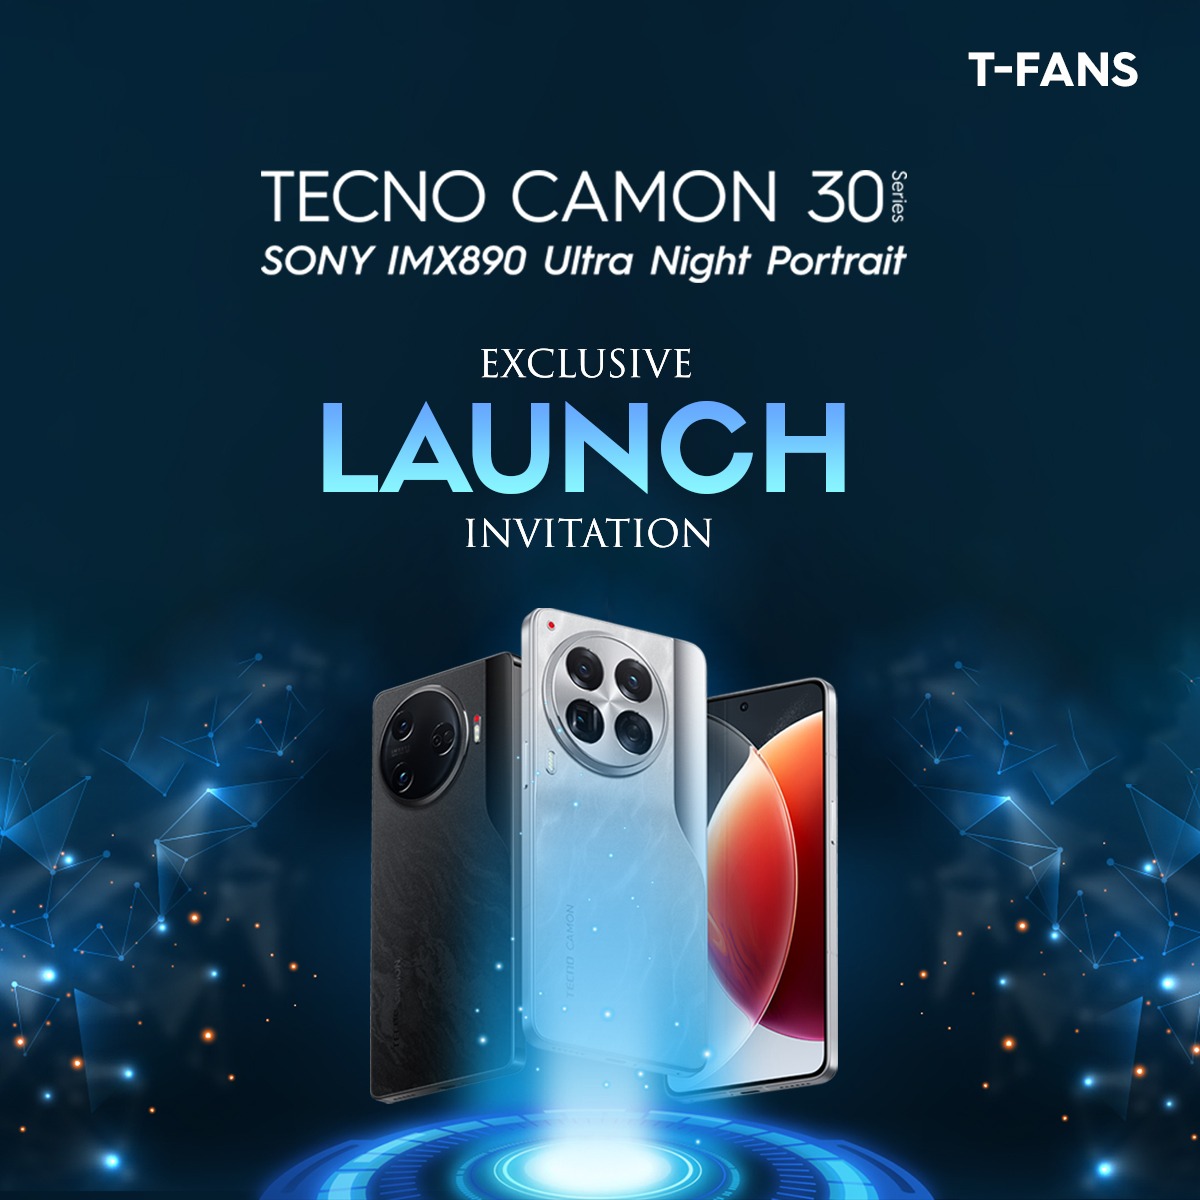 Dem sana dey offer flexible payment plans for all patrons ohh. There is no excuse to not upgrade from your yams now 🤣🤣🤣🤣🤣 #TECNOCAMON30Launch